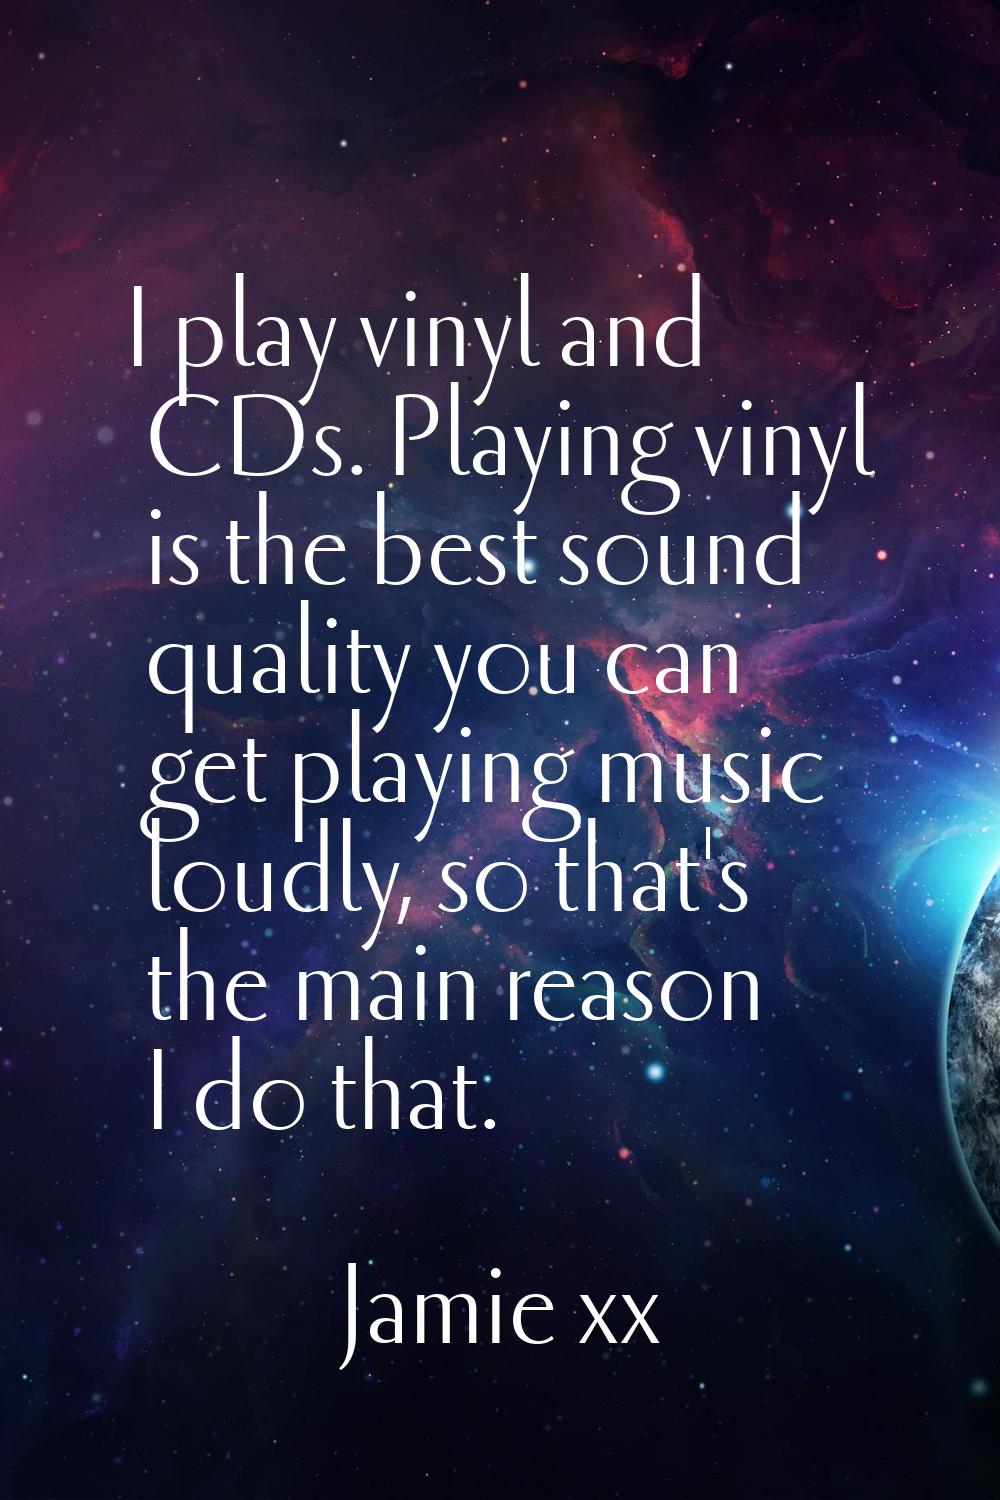 I play vinyl and CDs. Playing vinyl is the best sound quality you can get playing music loudly, so 